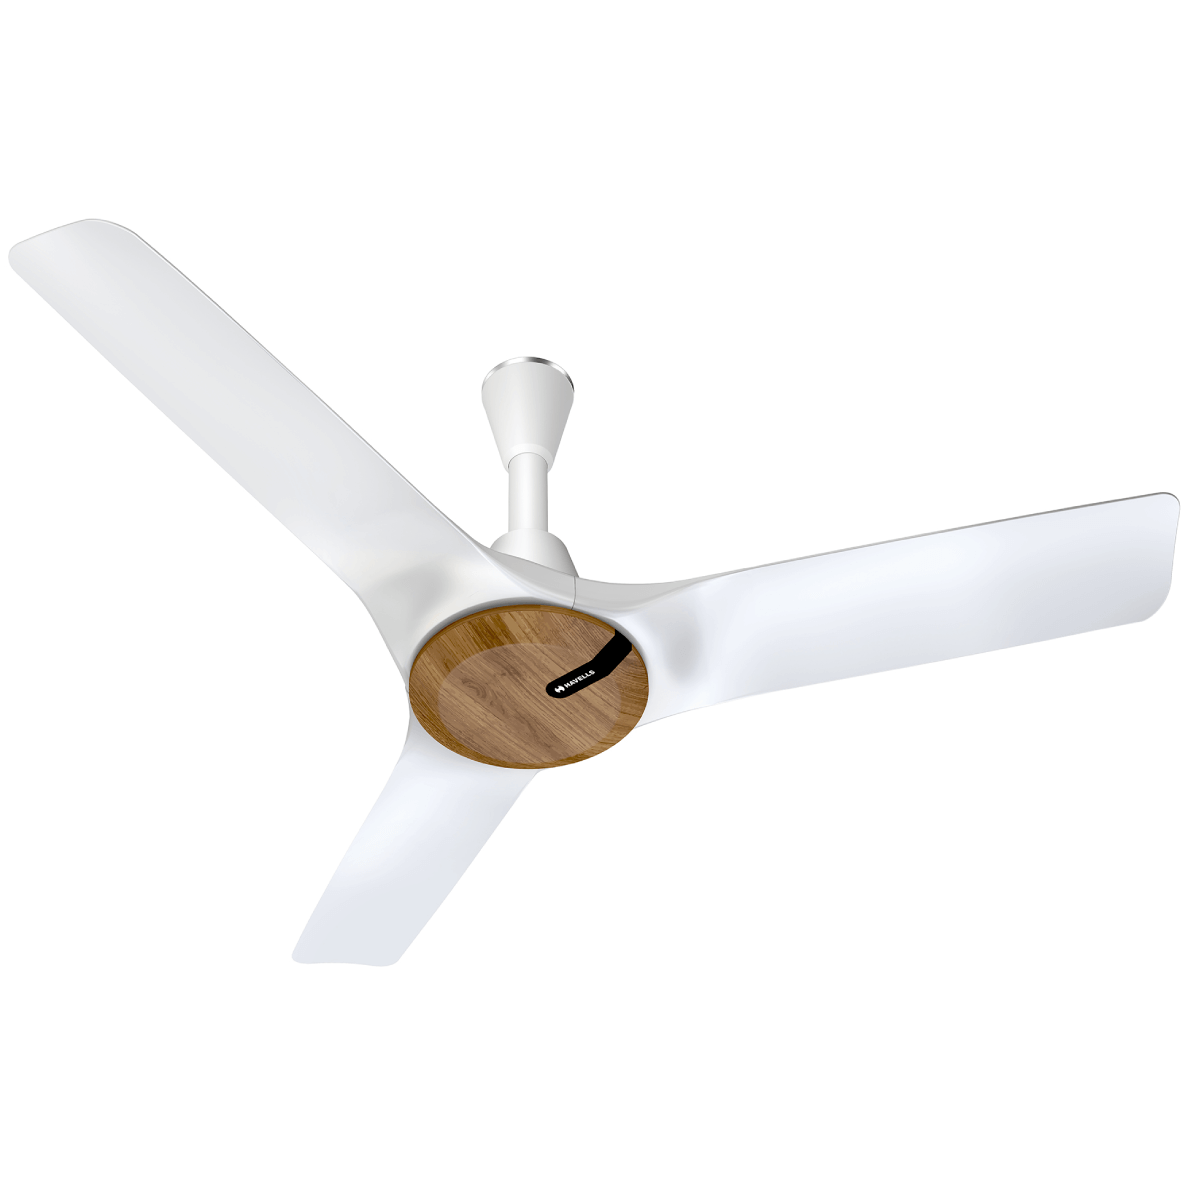 Havells BLDC Ceiling Fan 1200mm STEALTH NEO BLDC